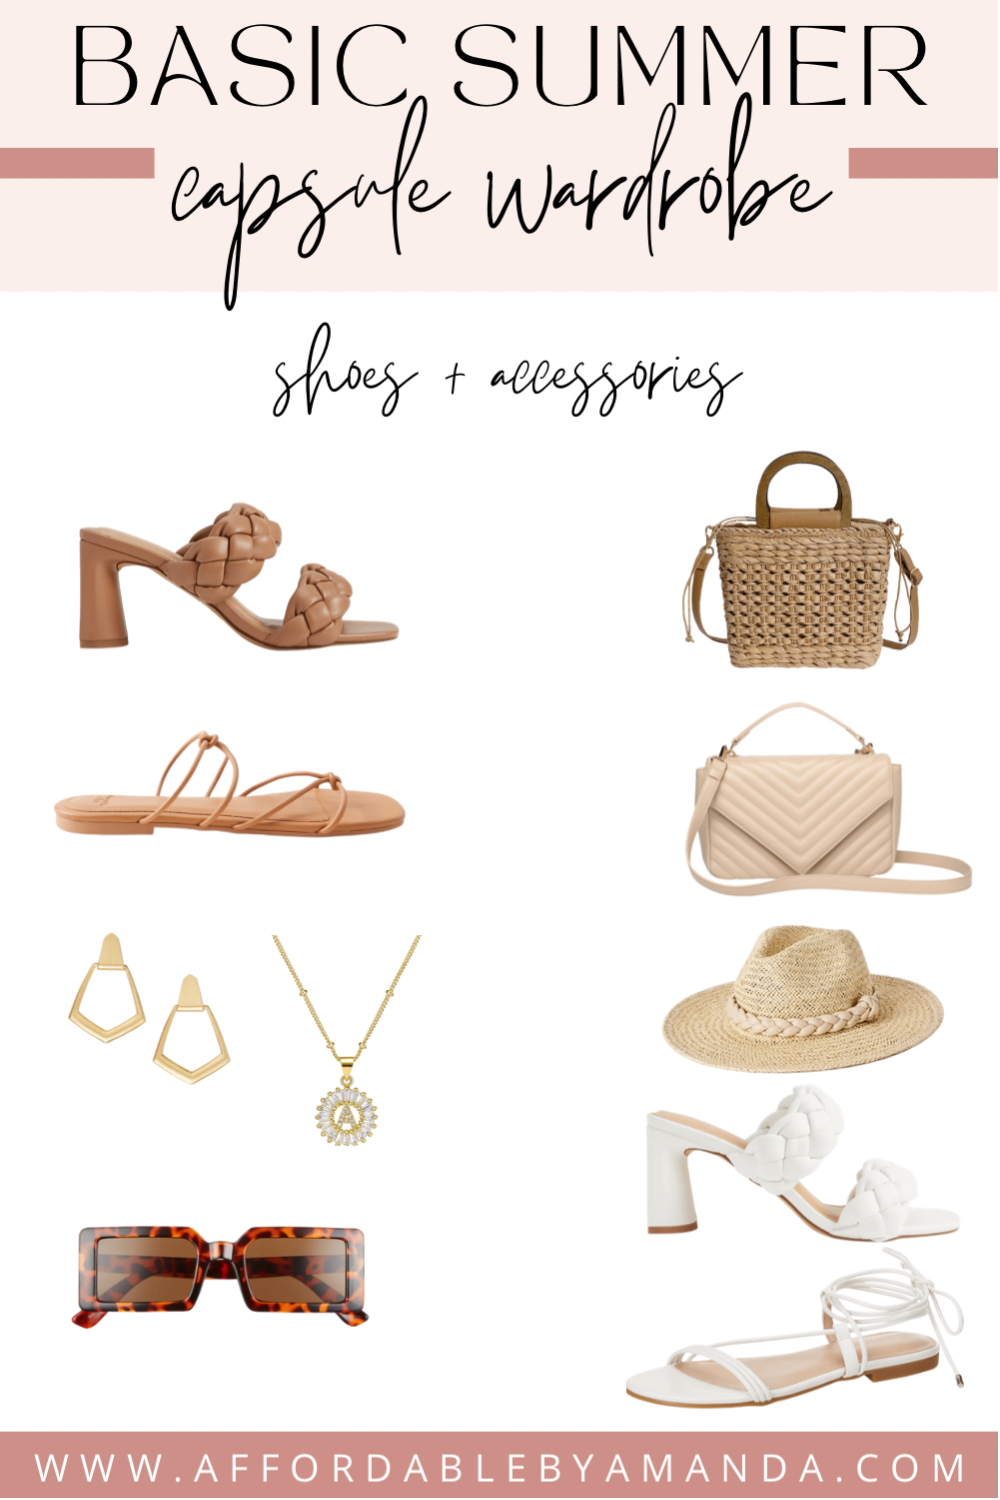 Basic Summer Capsule Wardrobe. Shoes and Accessories for the Summer.